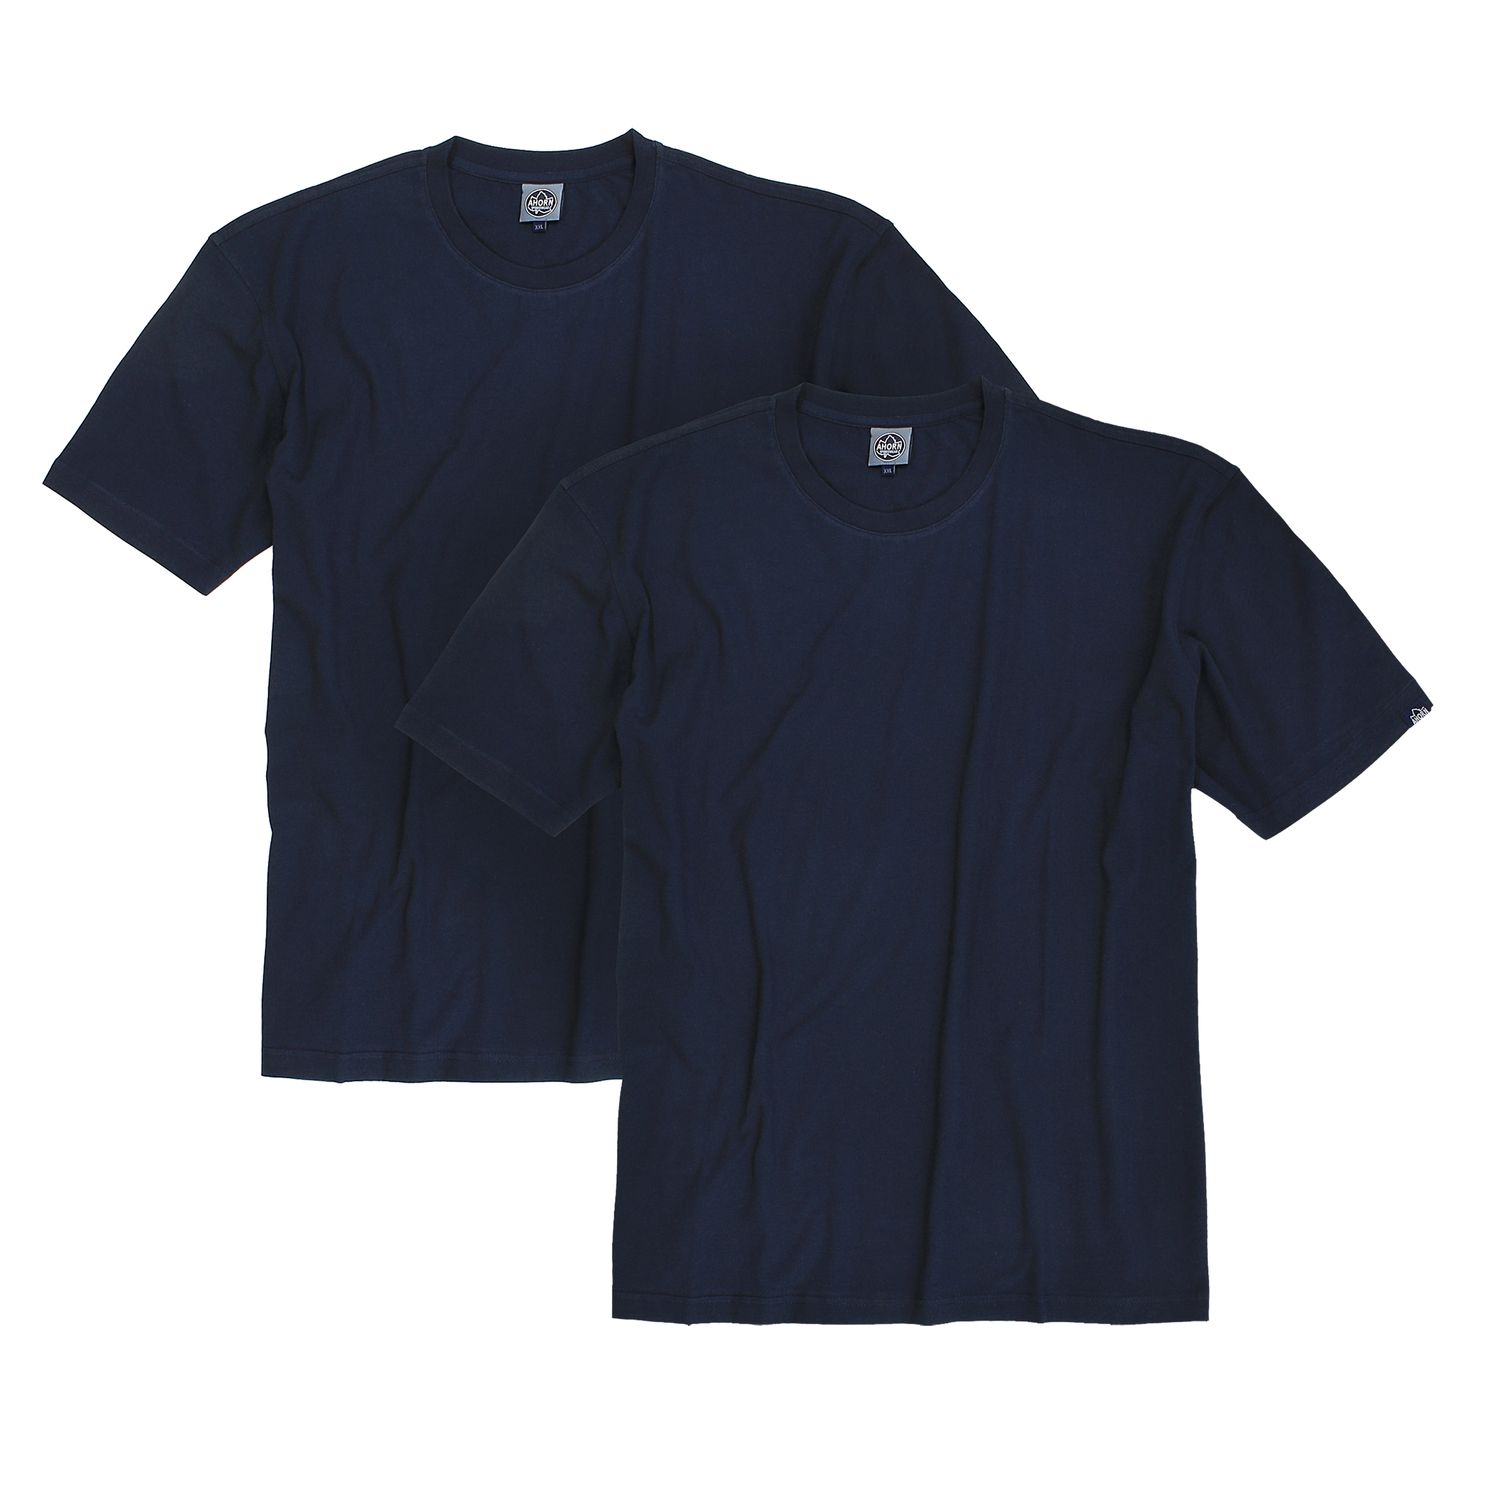 T-shirt in dark blue by Ahorn Sportswear in extra large sizes up to 10XL- double pack